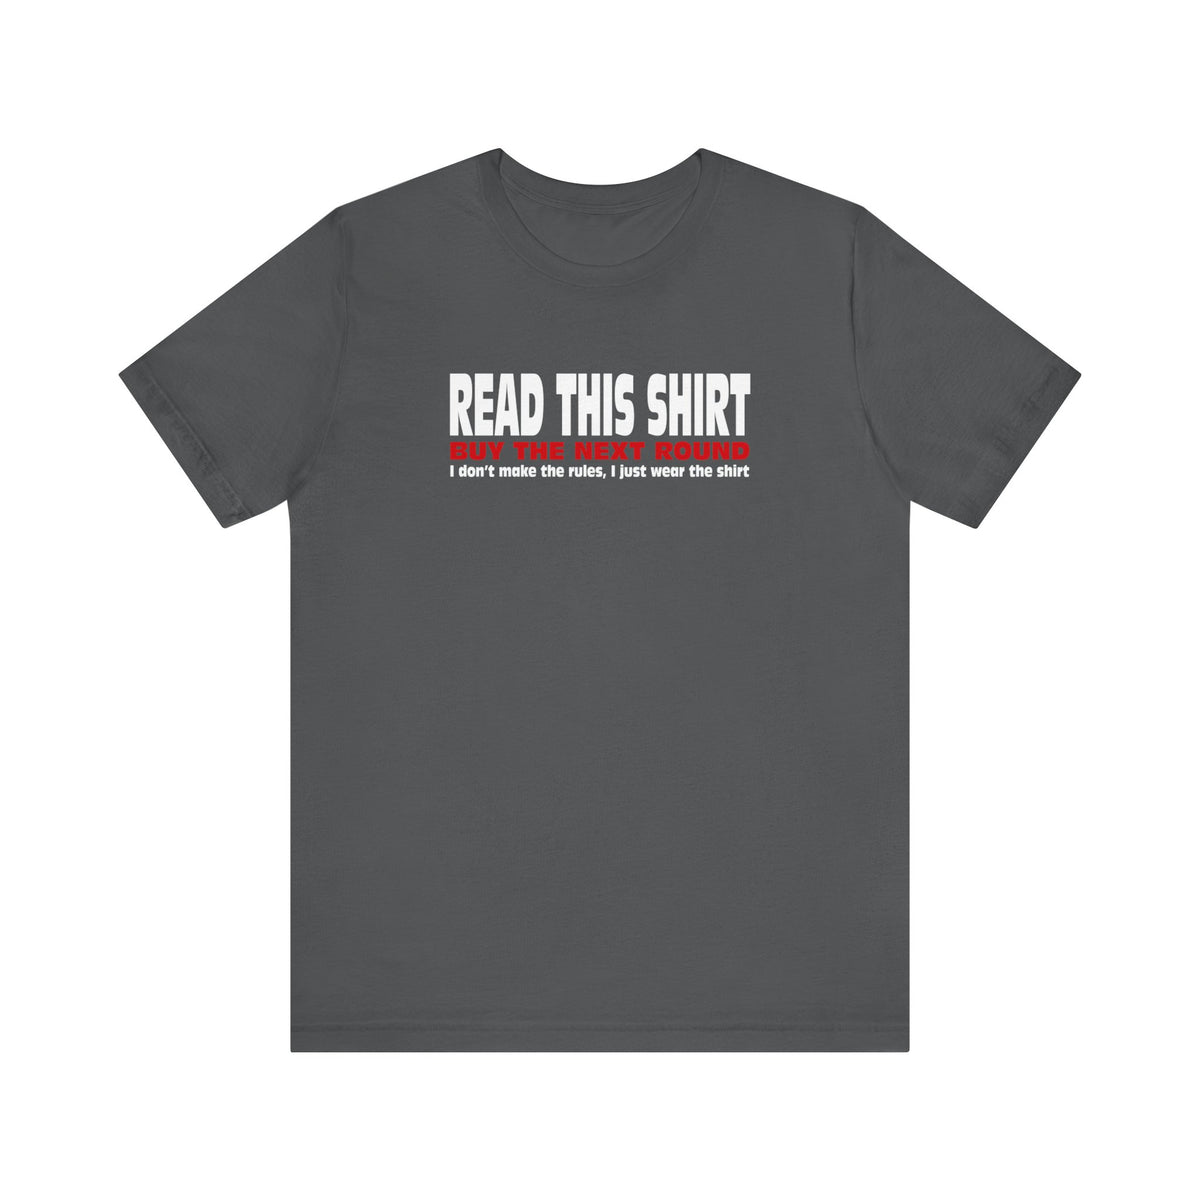 Read This Shirt Buy The Next Round. I Don't Make The Rules I Just Wear The Shirt  - Men's T-Shirt